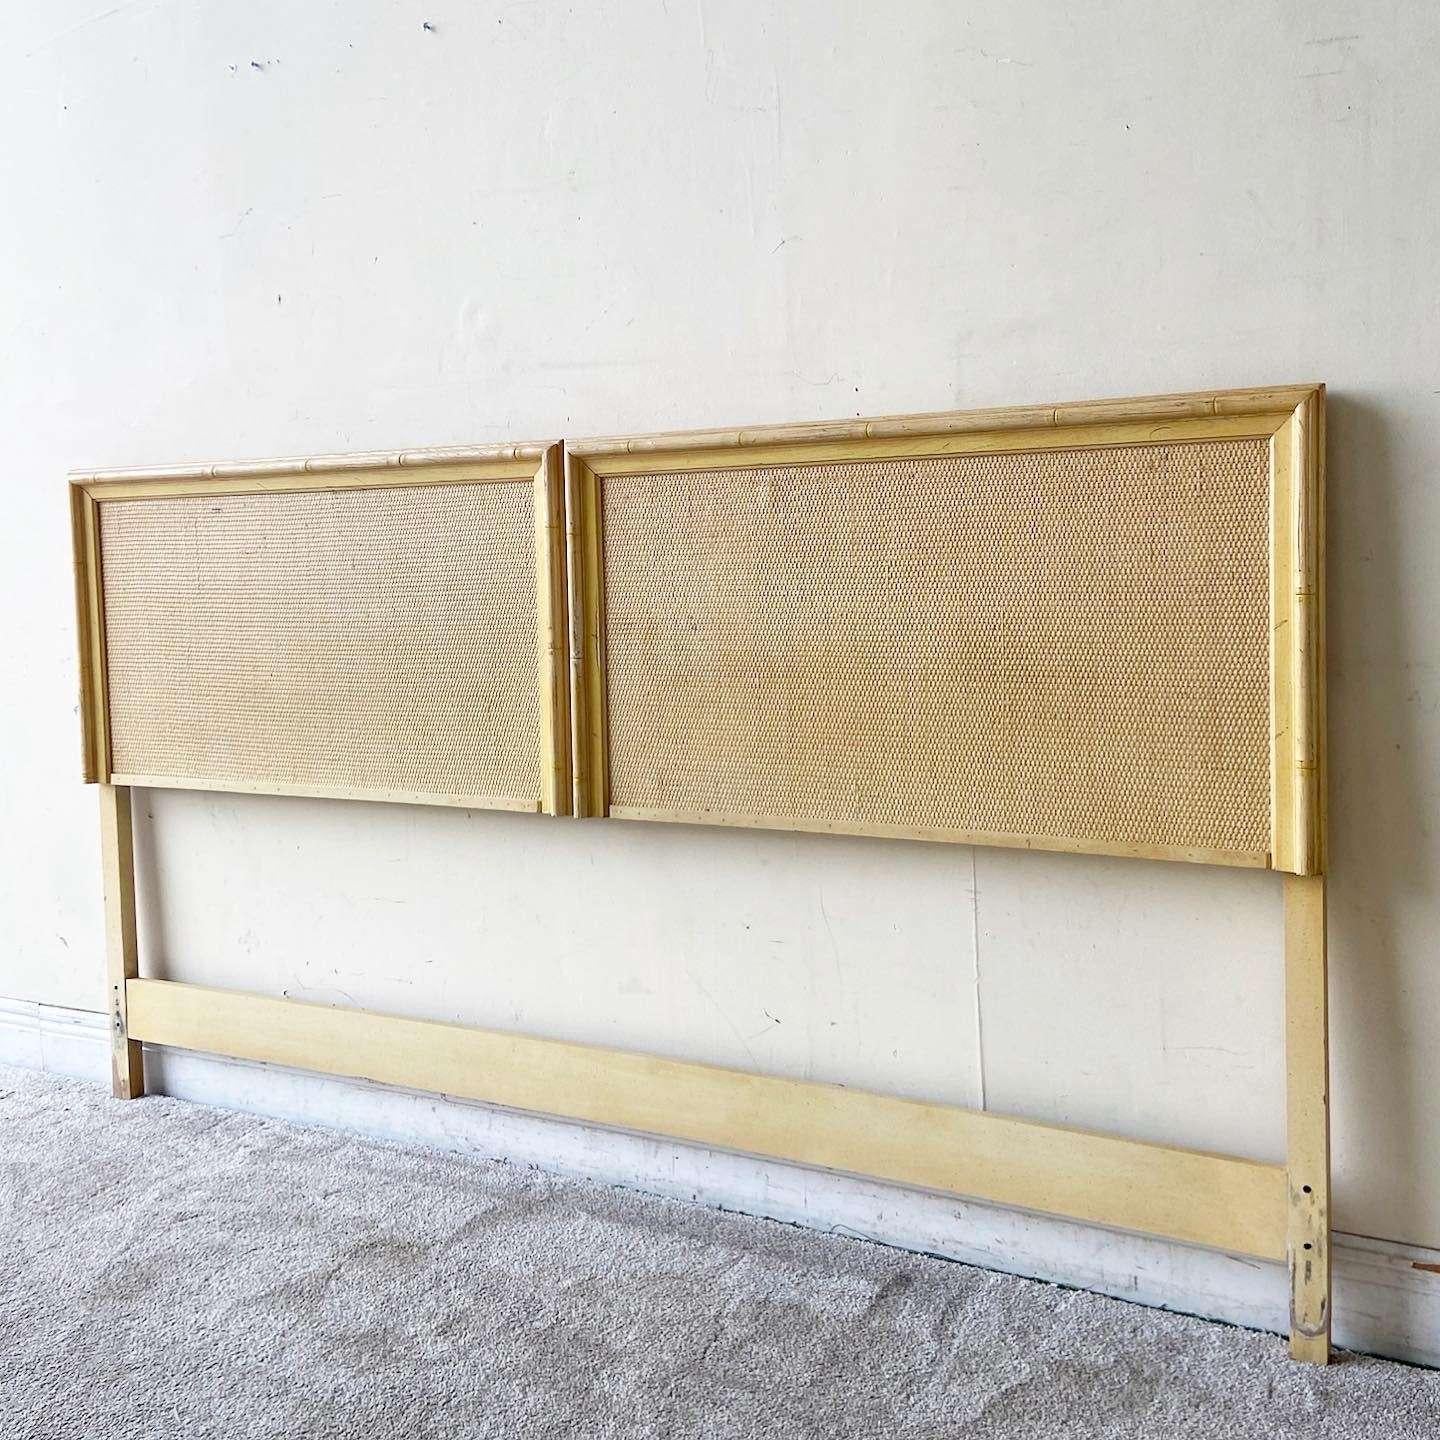 Exceptional vintage boho chic king size headboard. Feature a faux bamboo frame with a cream/light yellow finish.